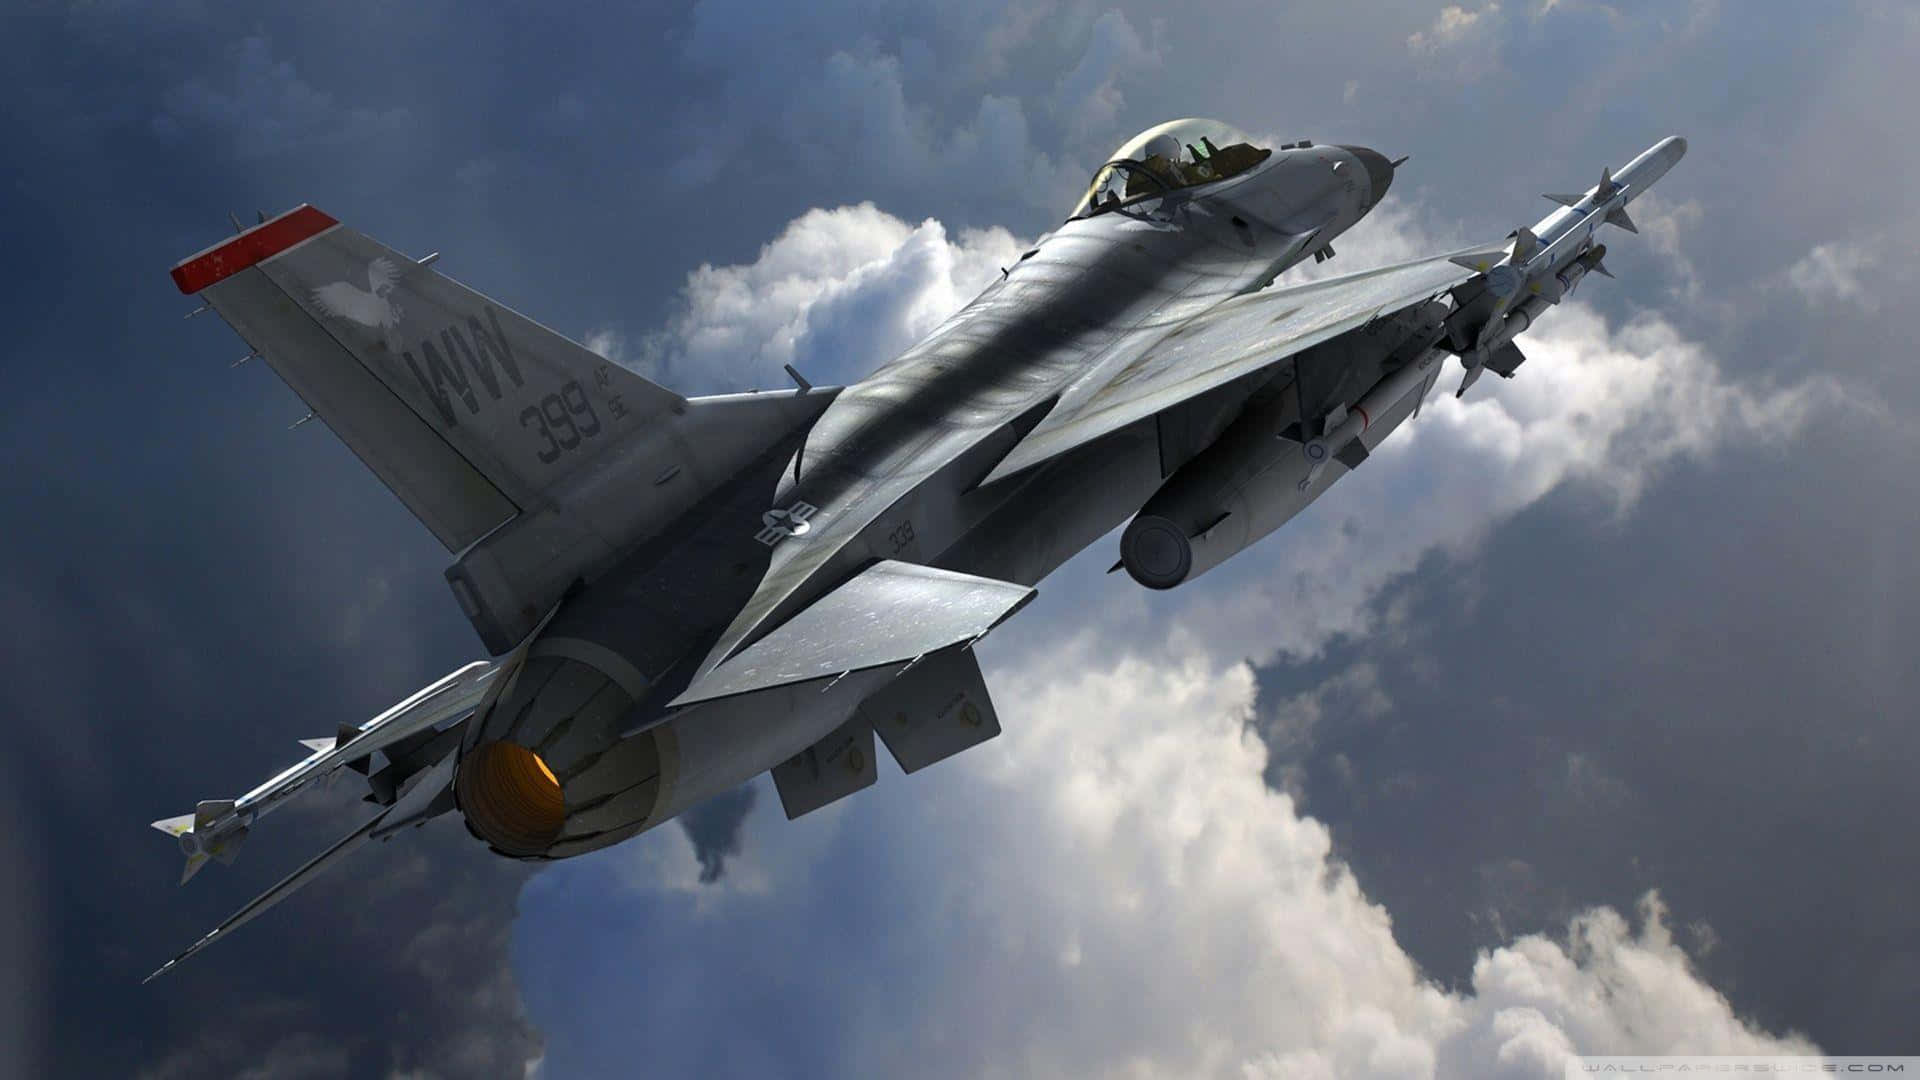 F16 Fighter Jet Against Cloudy Sky Wallpaper